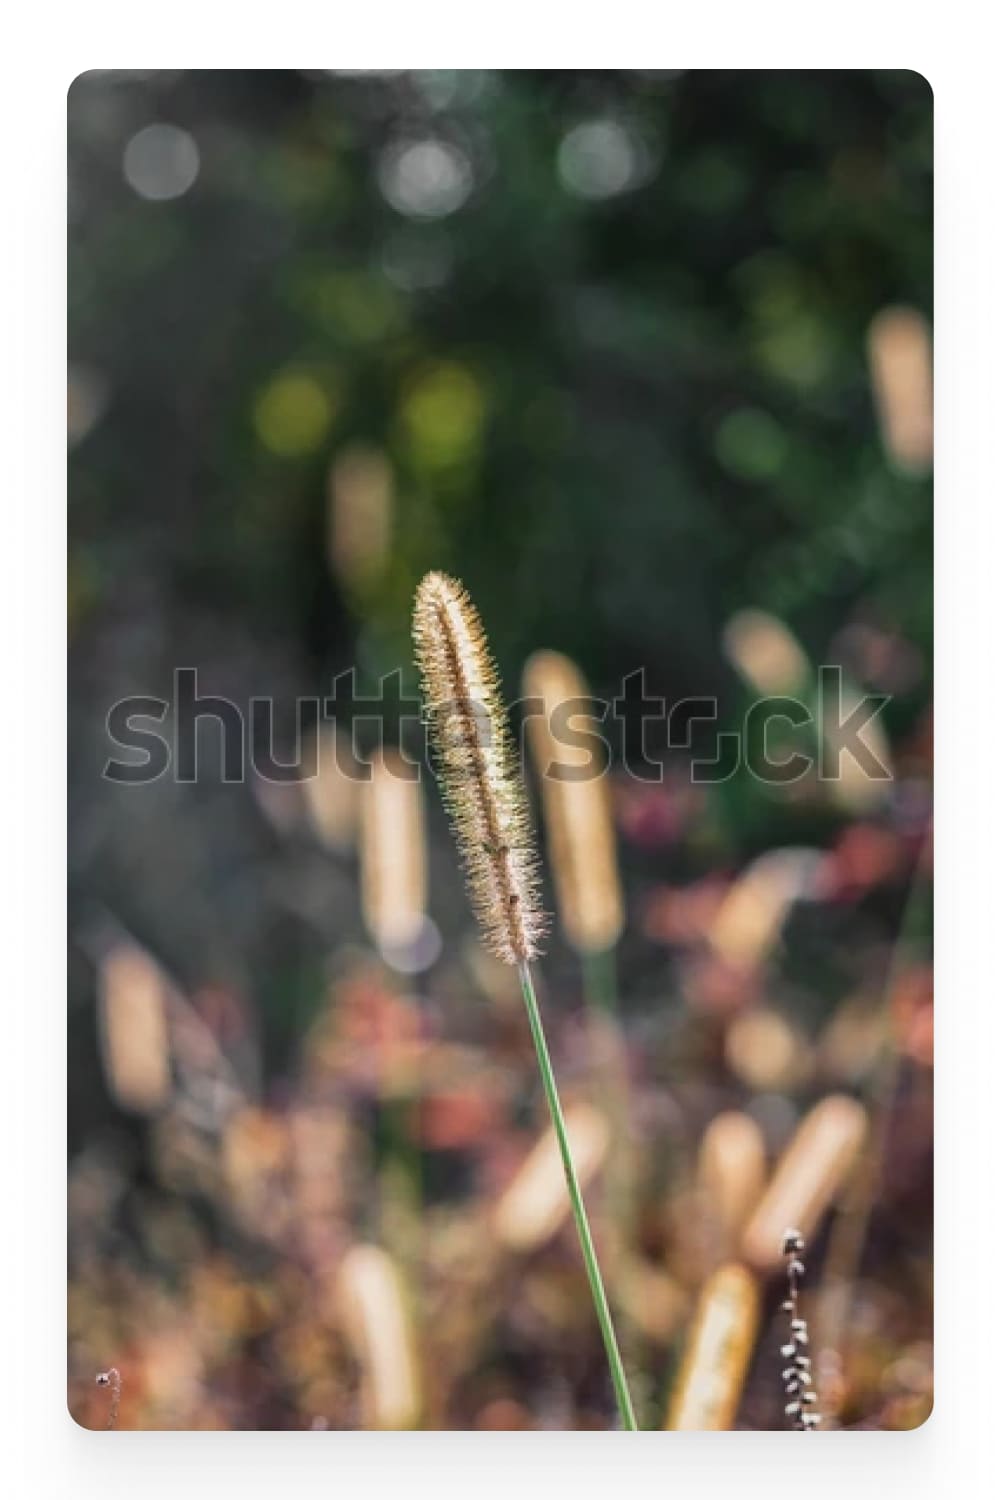 Photo of a spikelet of grass with bokeh effect.